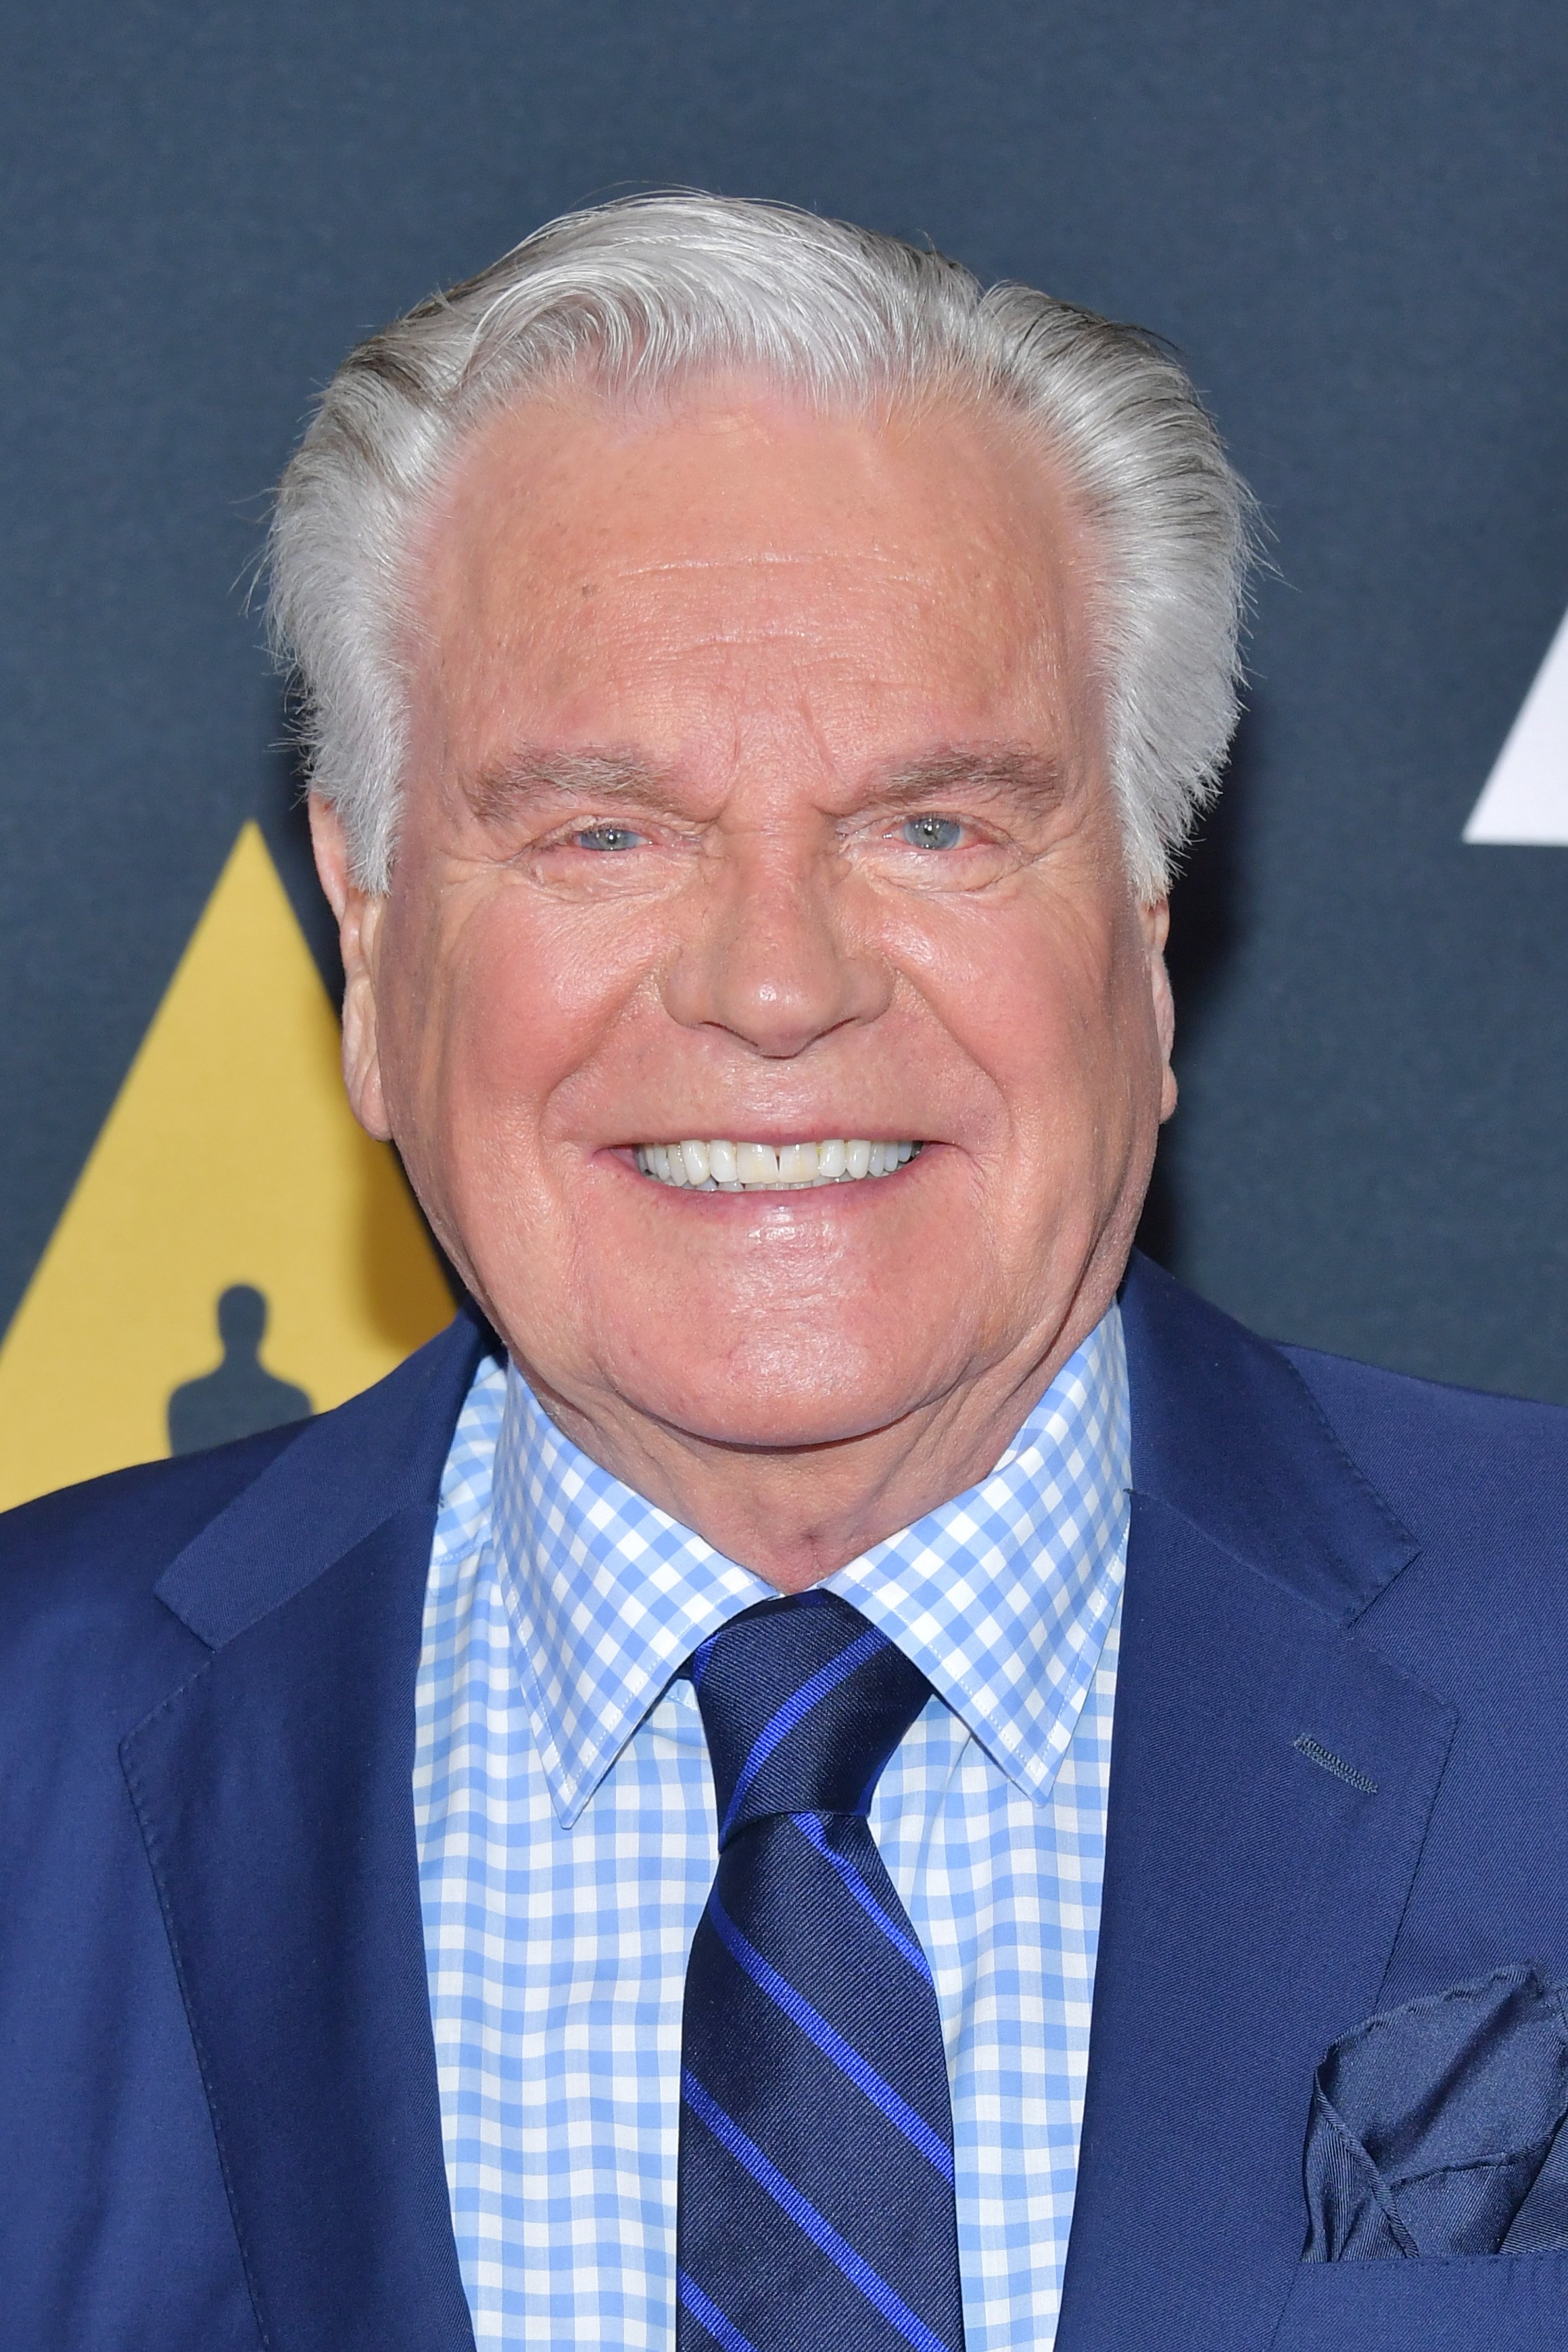 Robert J. Wagner attends the inaugural Robert Osborne Celebration of Classic Film Series screening of "Dodsworth" presented by The Academy at Samuel Goldwyn Theater on October 07, 2019 in Beverly Hills, California. | Source: Getty Images